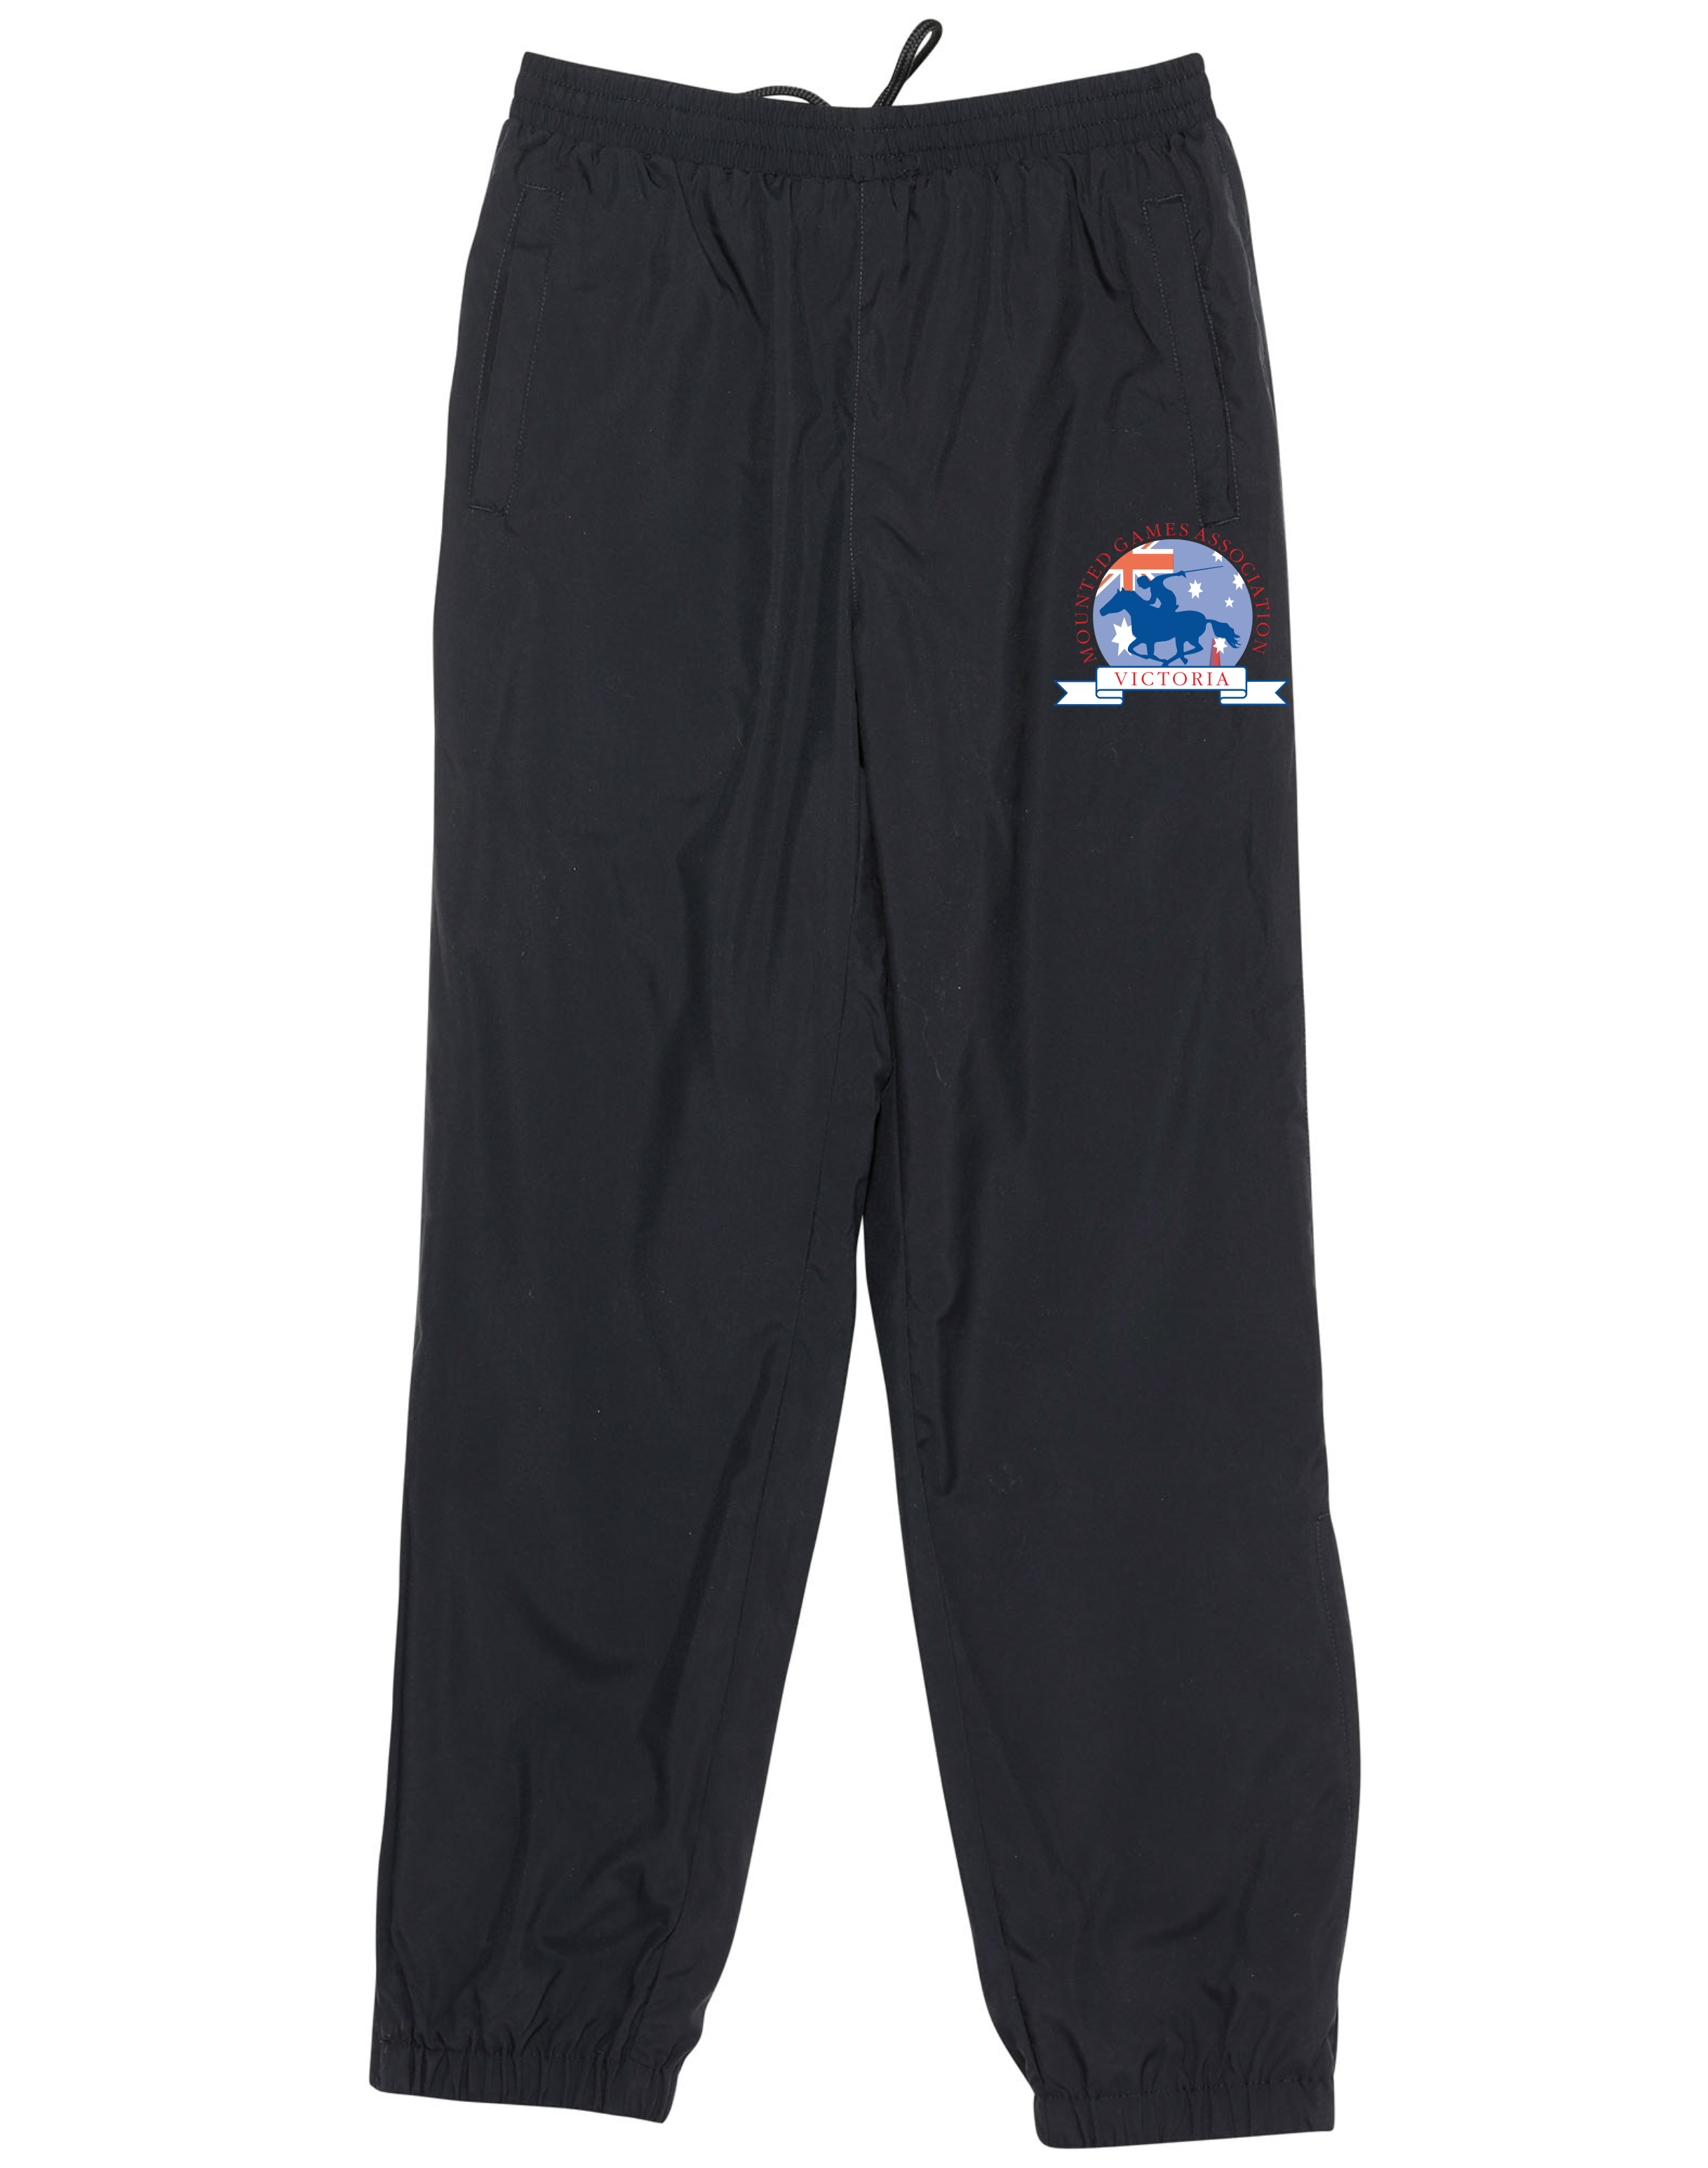 Warm Up Track Pants in Navy/White